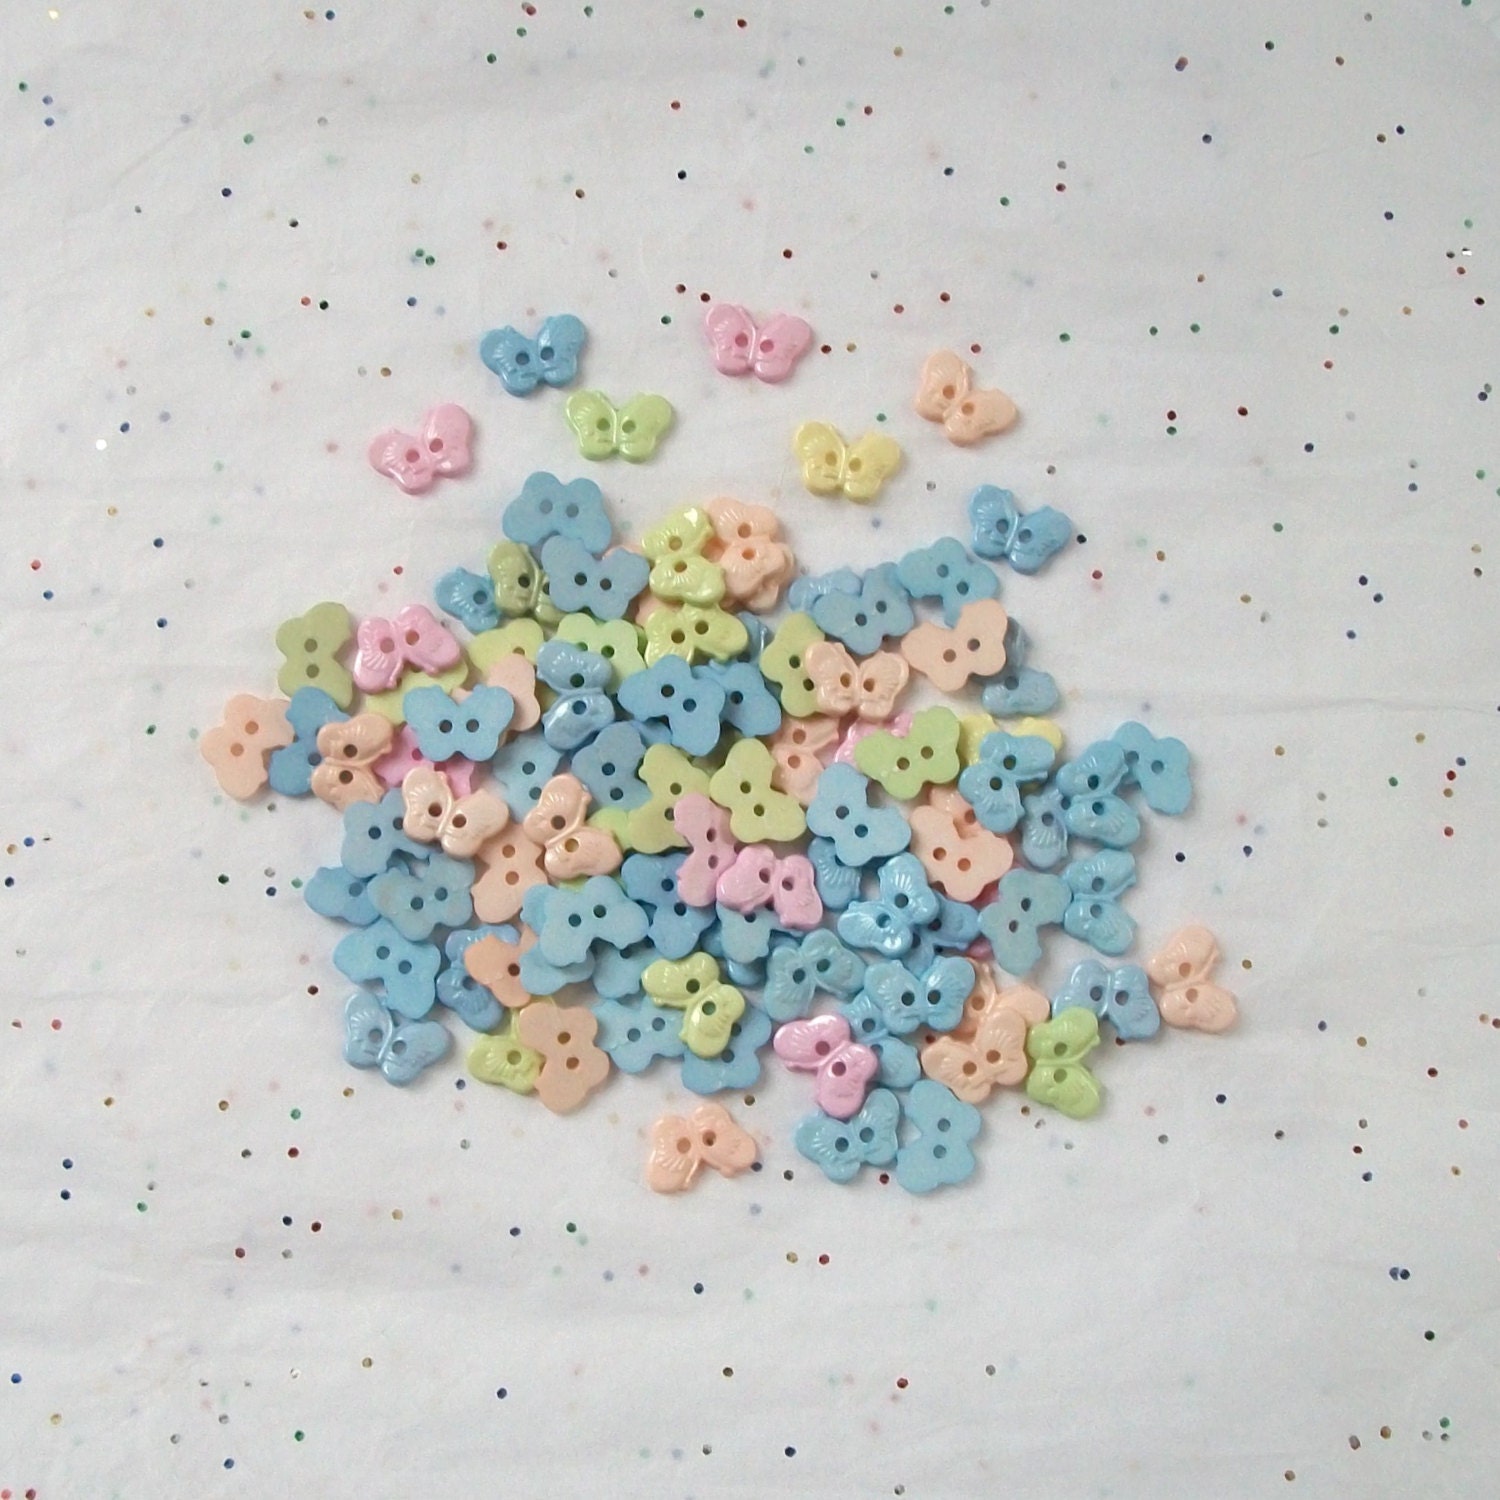 100 Butterfly Buttons - 2 hole - flat back -   Grab Bag Crafting Jewelry Collect (E7)